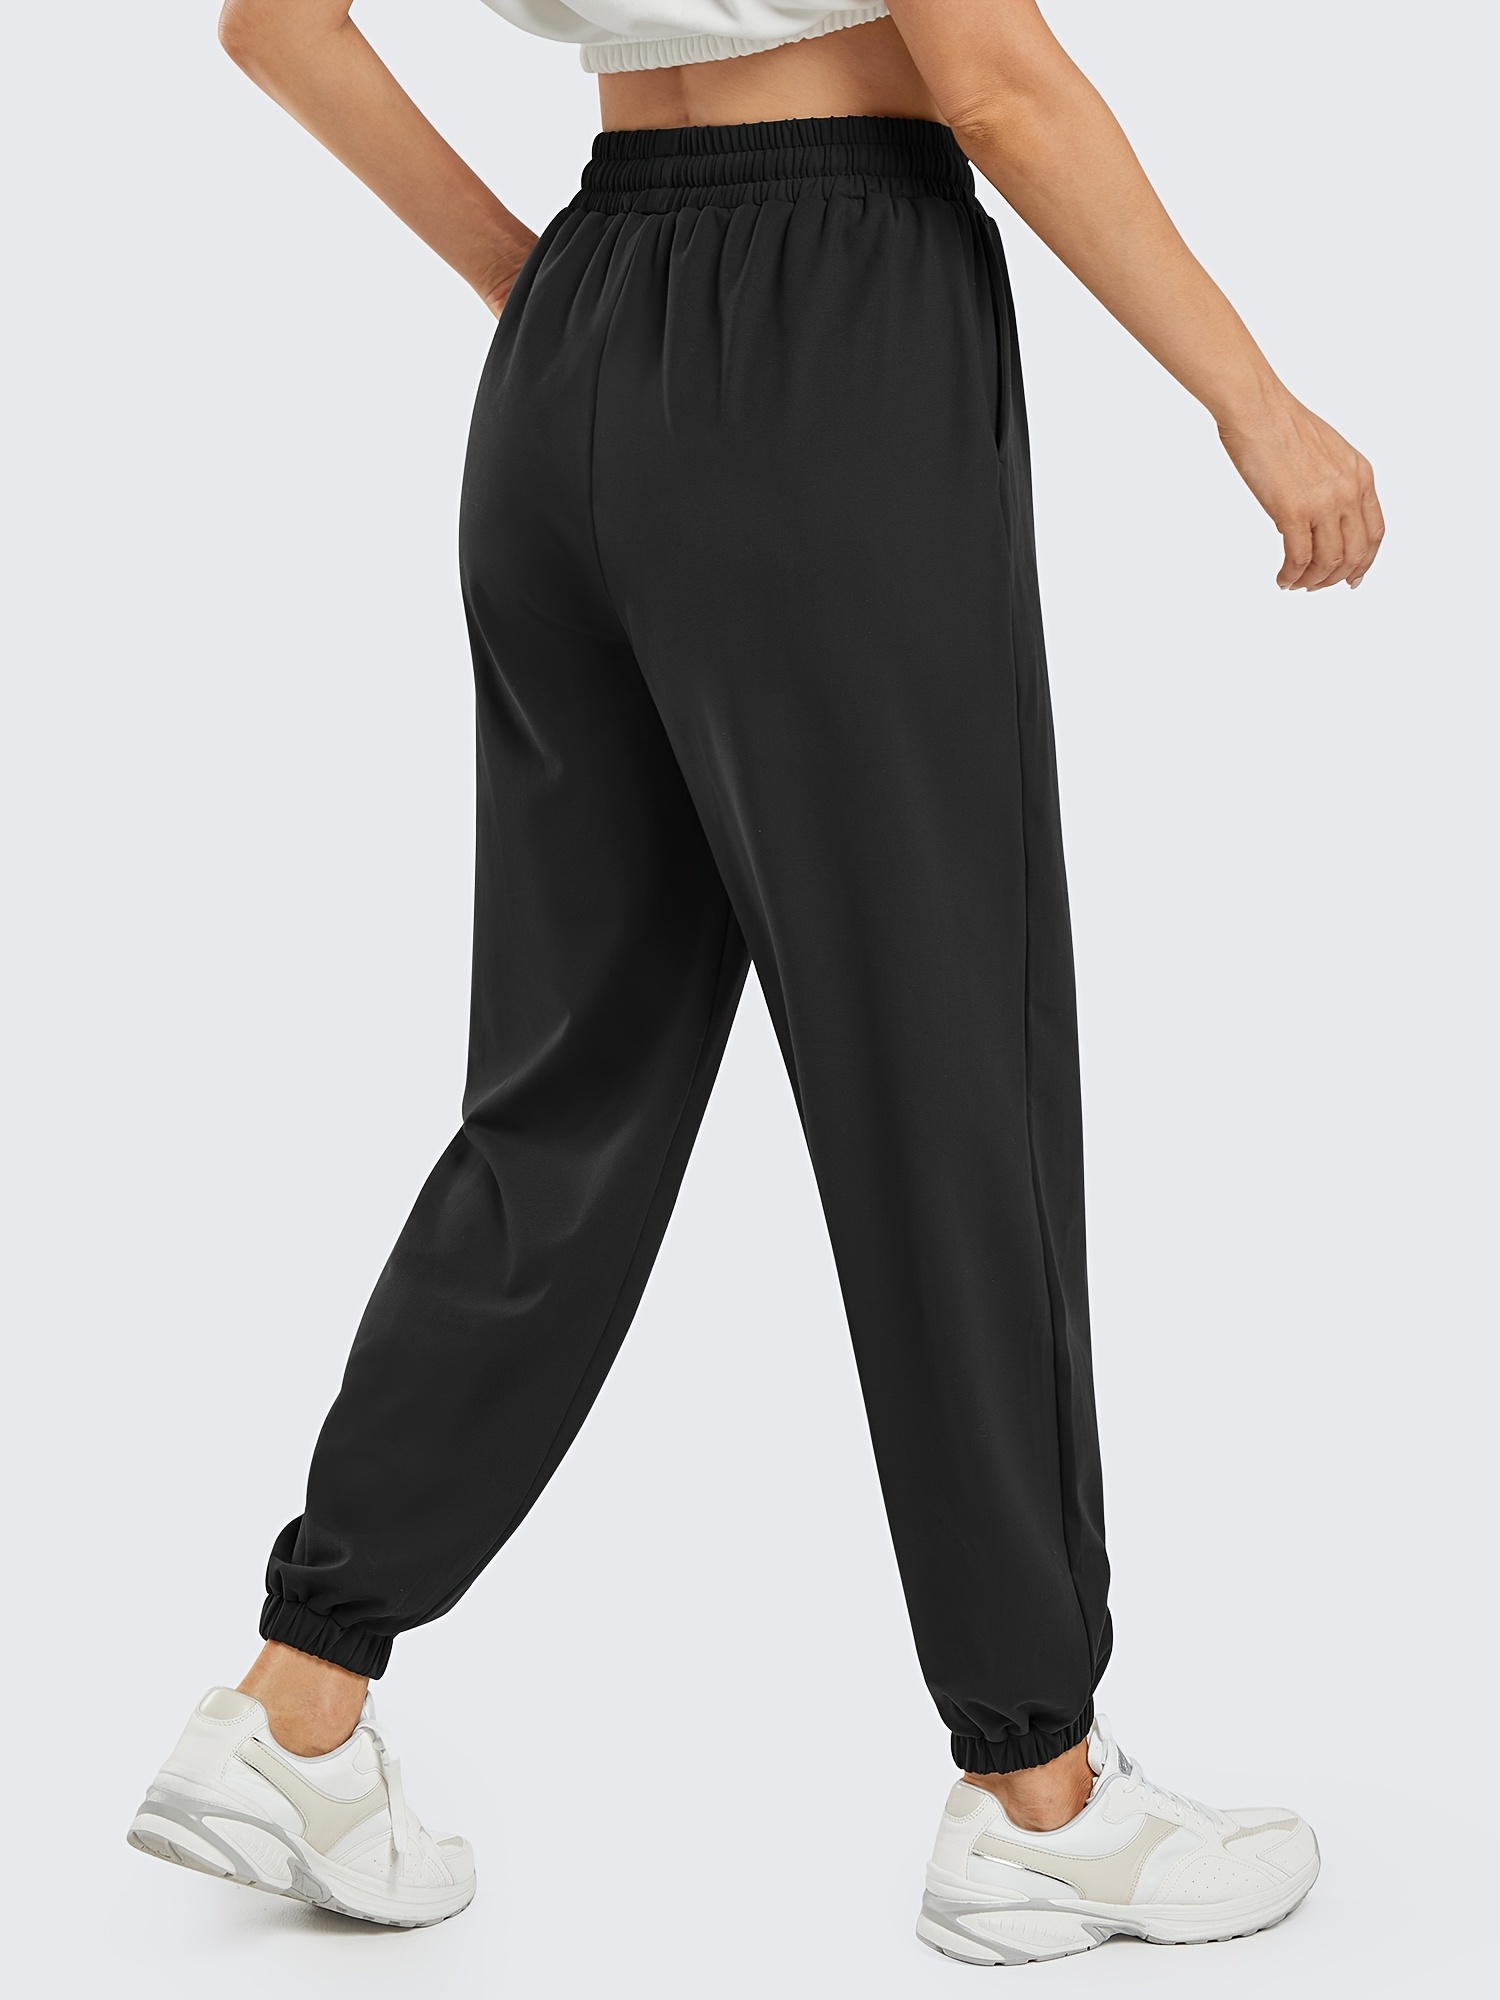 Cinch Bottom Sweatpants for Women with Pockets